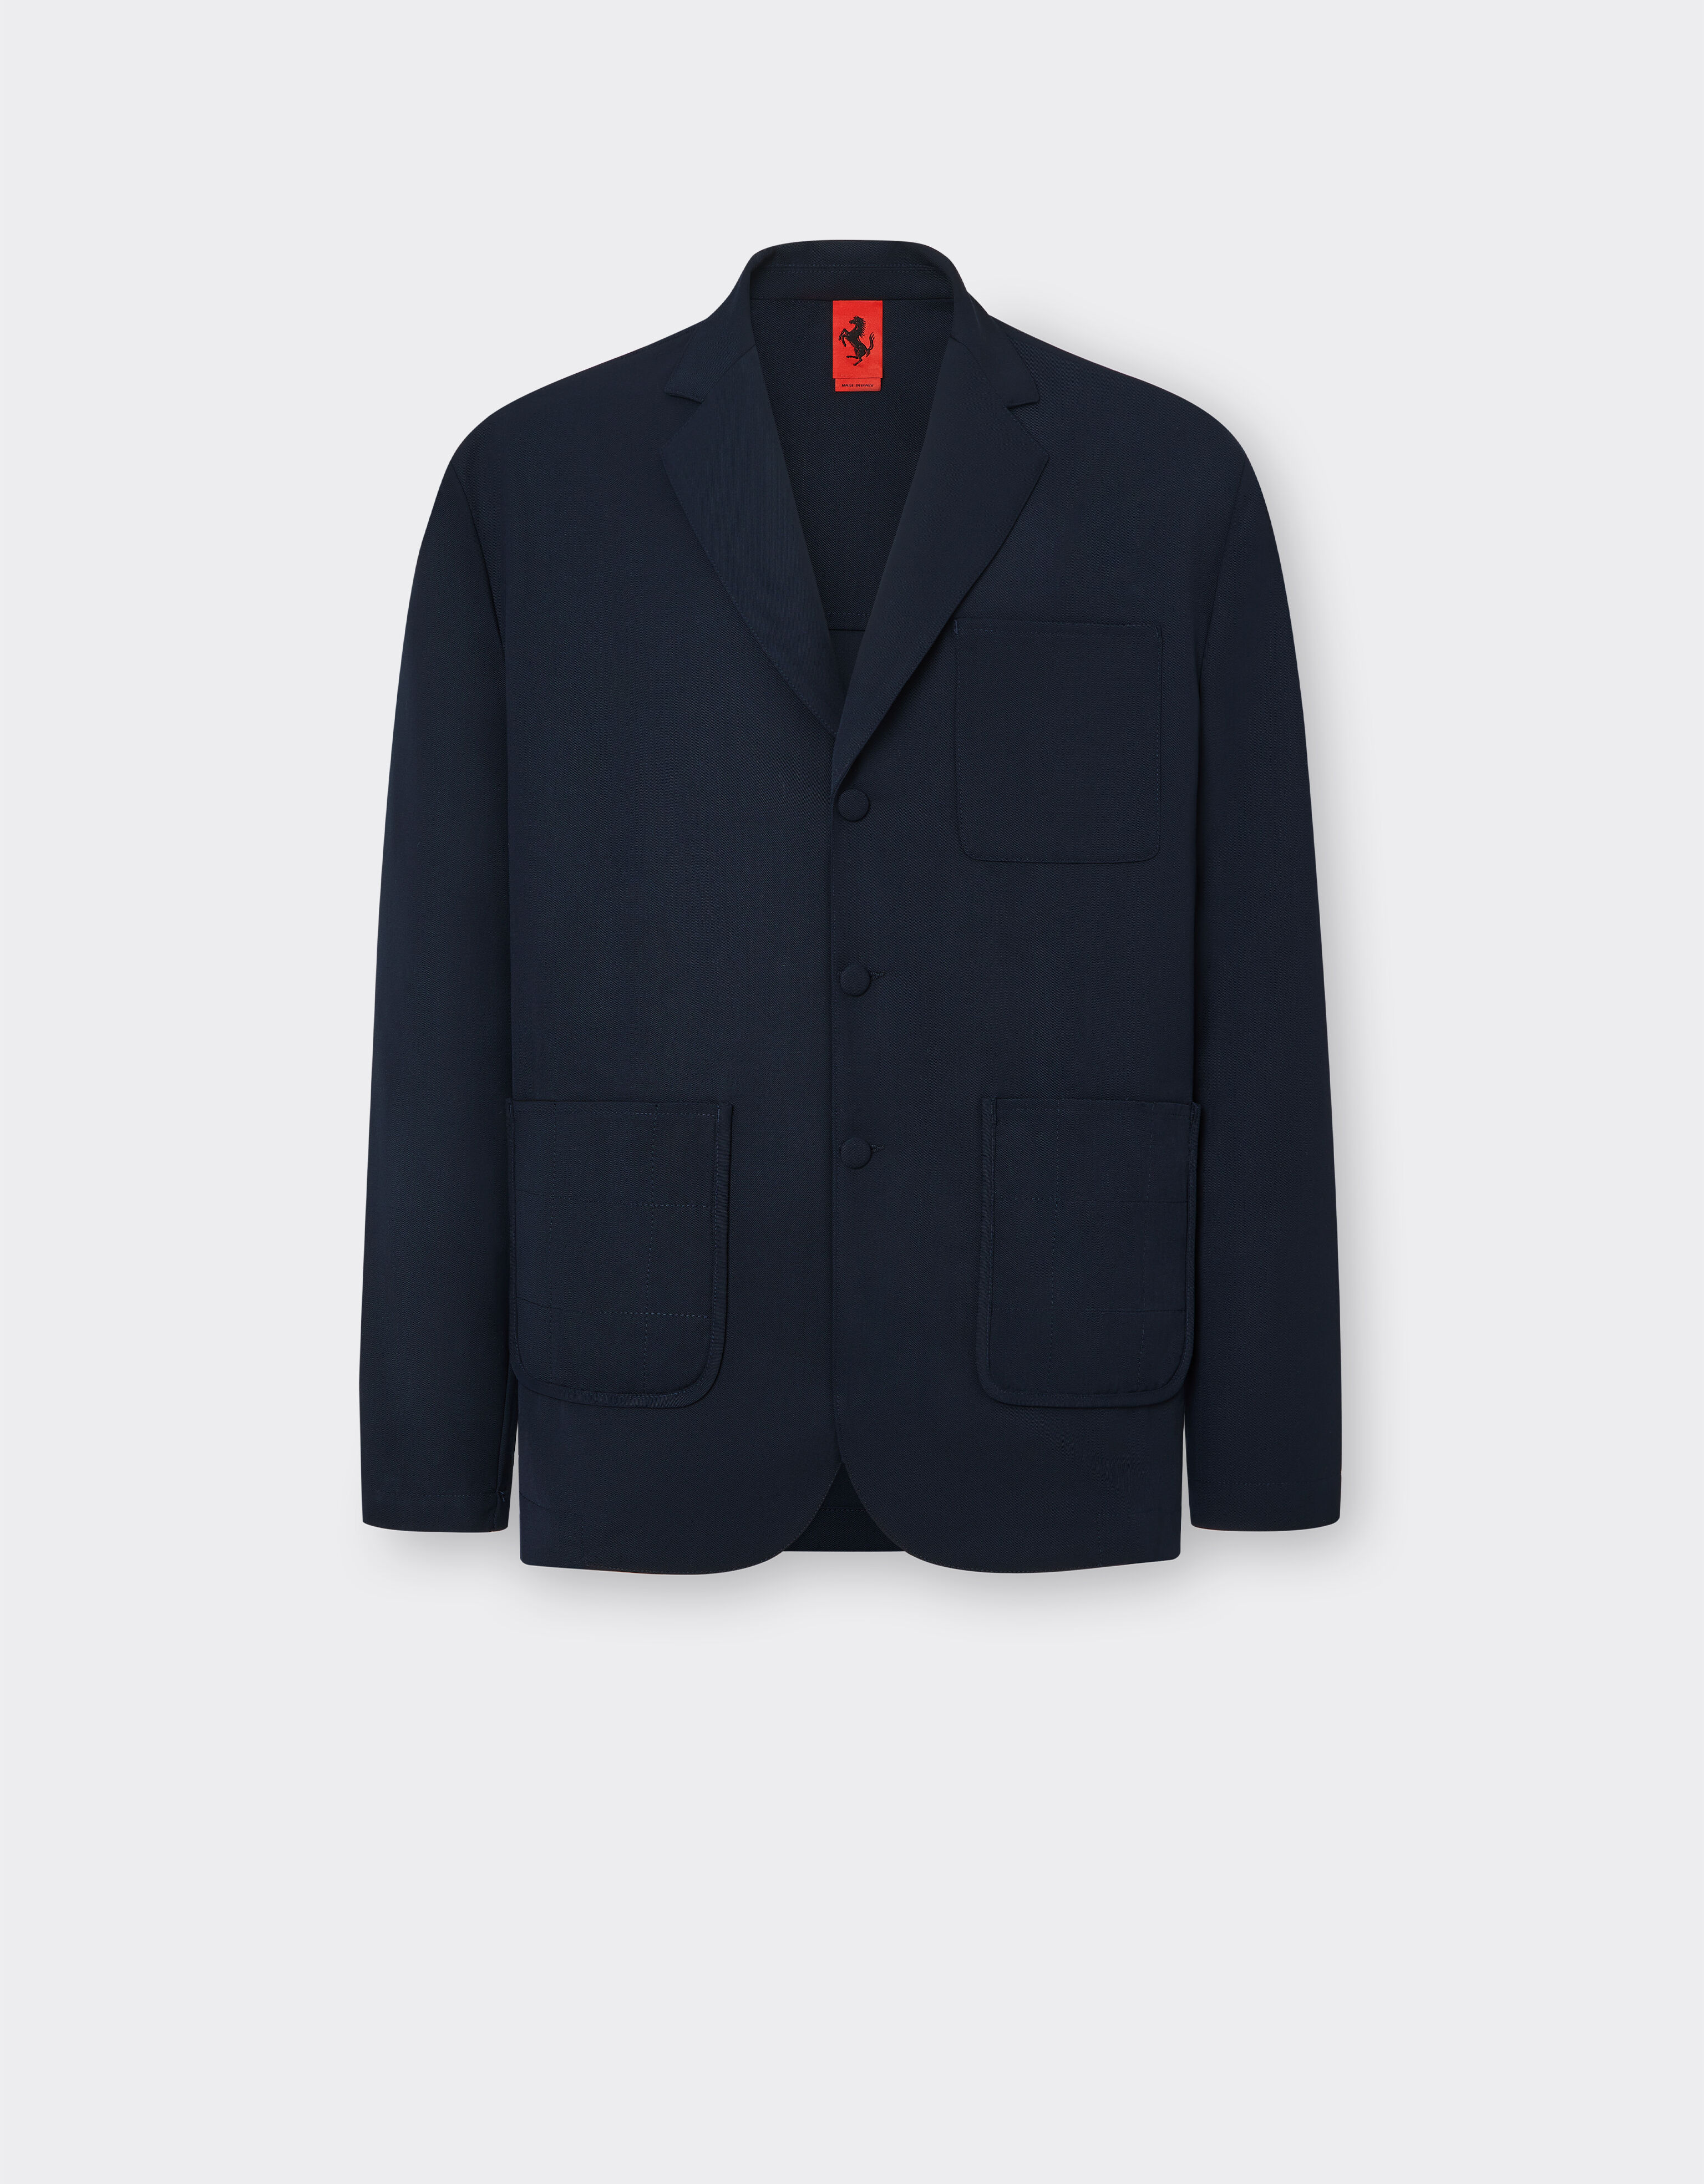 Ferrari Jacket in technical wool with 7X7 checked motif Navy 20756f